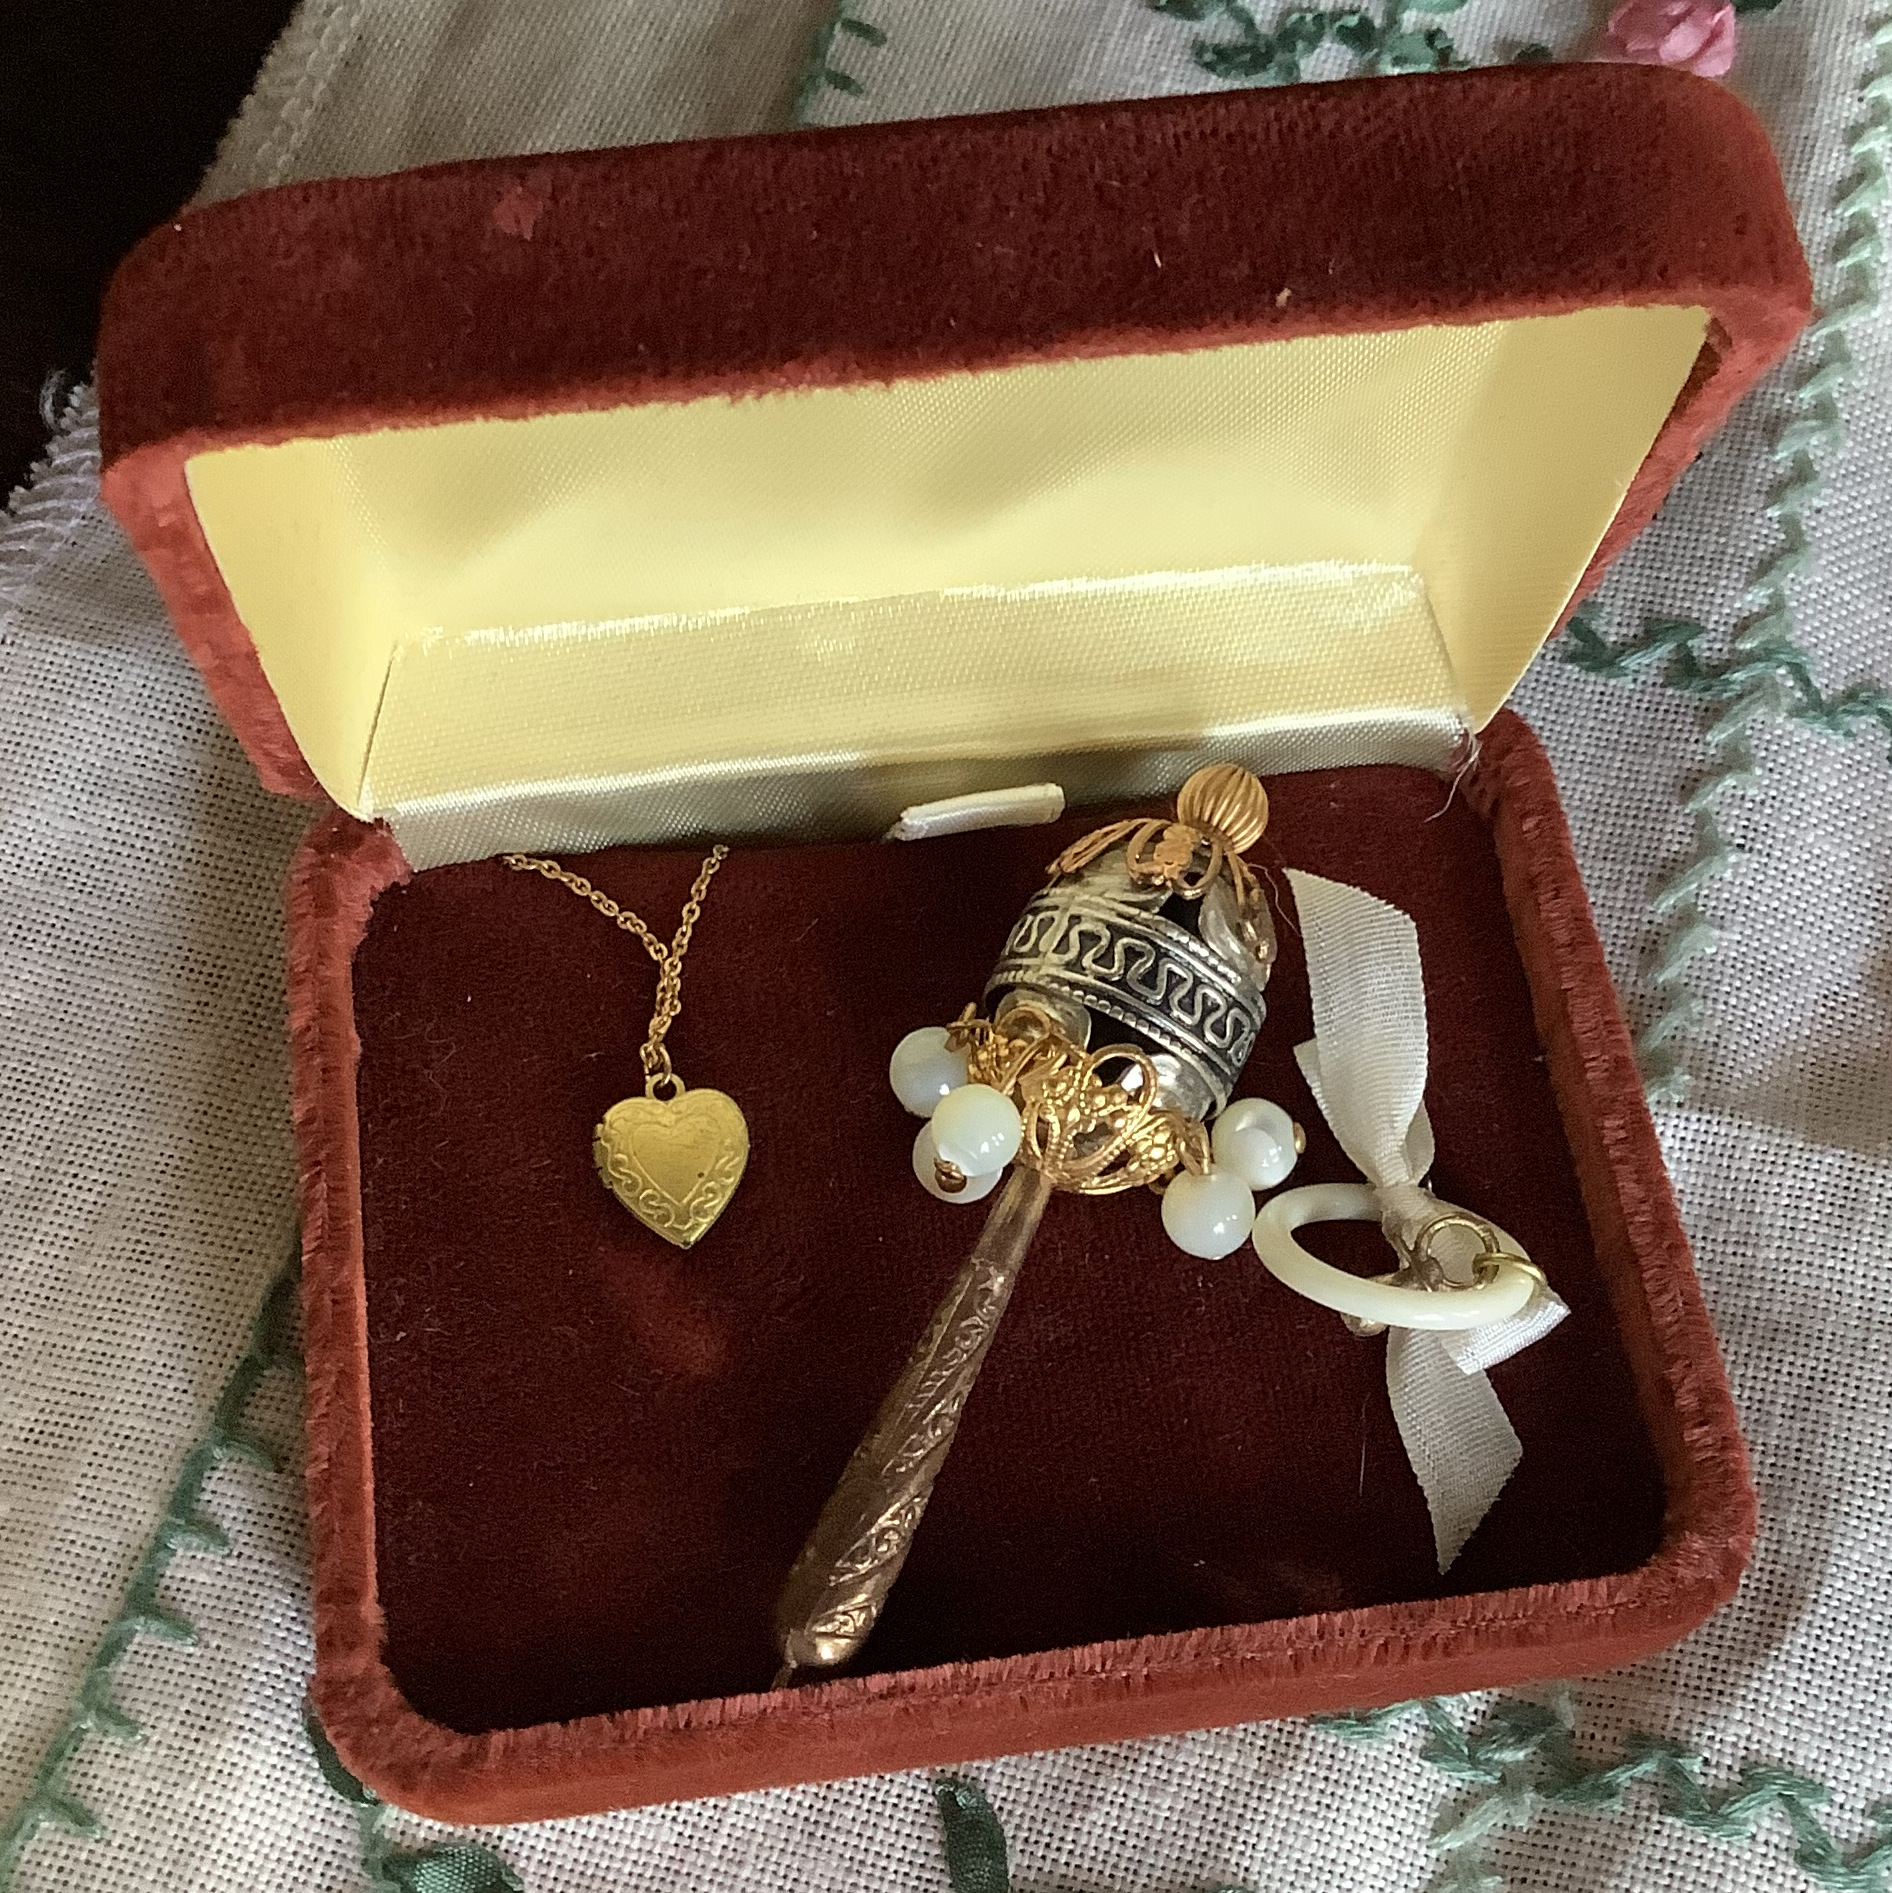 Burgundy velvet ring box containtin a gold- and silver-toned rattle, heart necklace, and pacifier